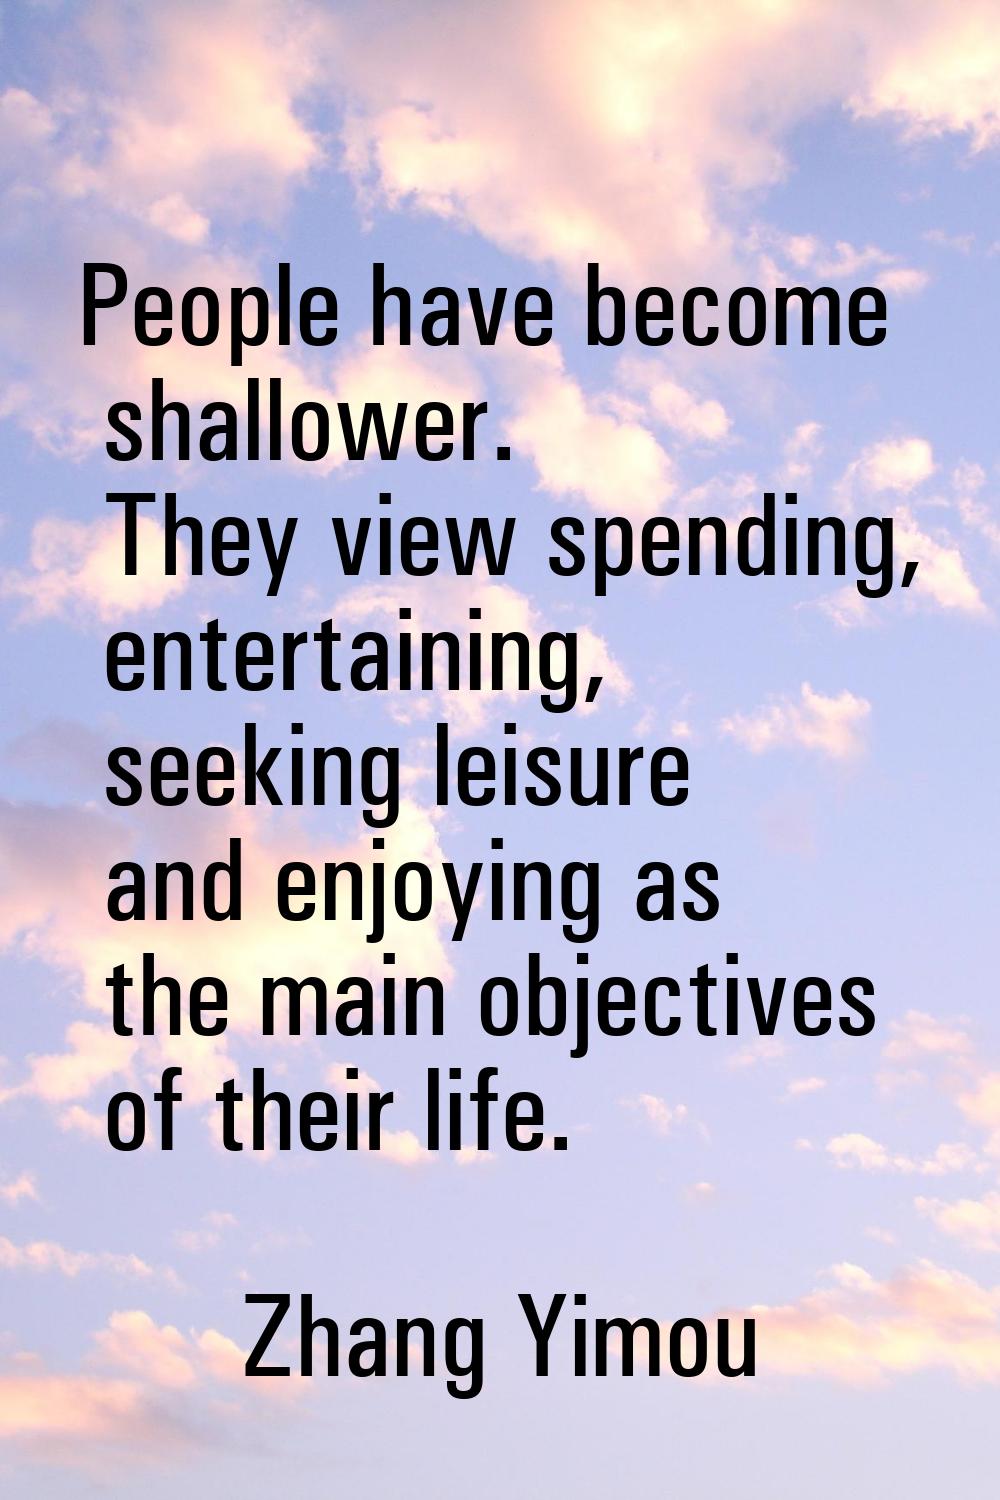 People have become shallower. They view spending, entertaining, seeking leisure and enjoying as the